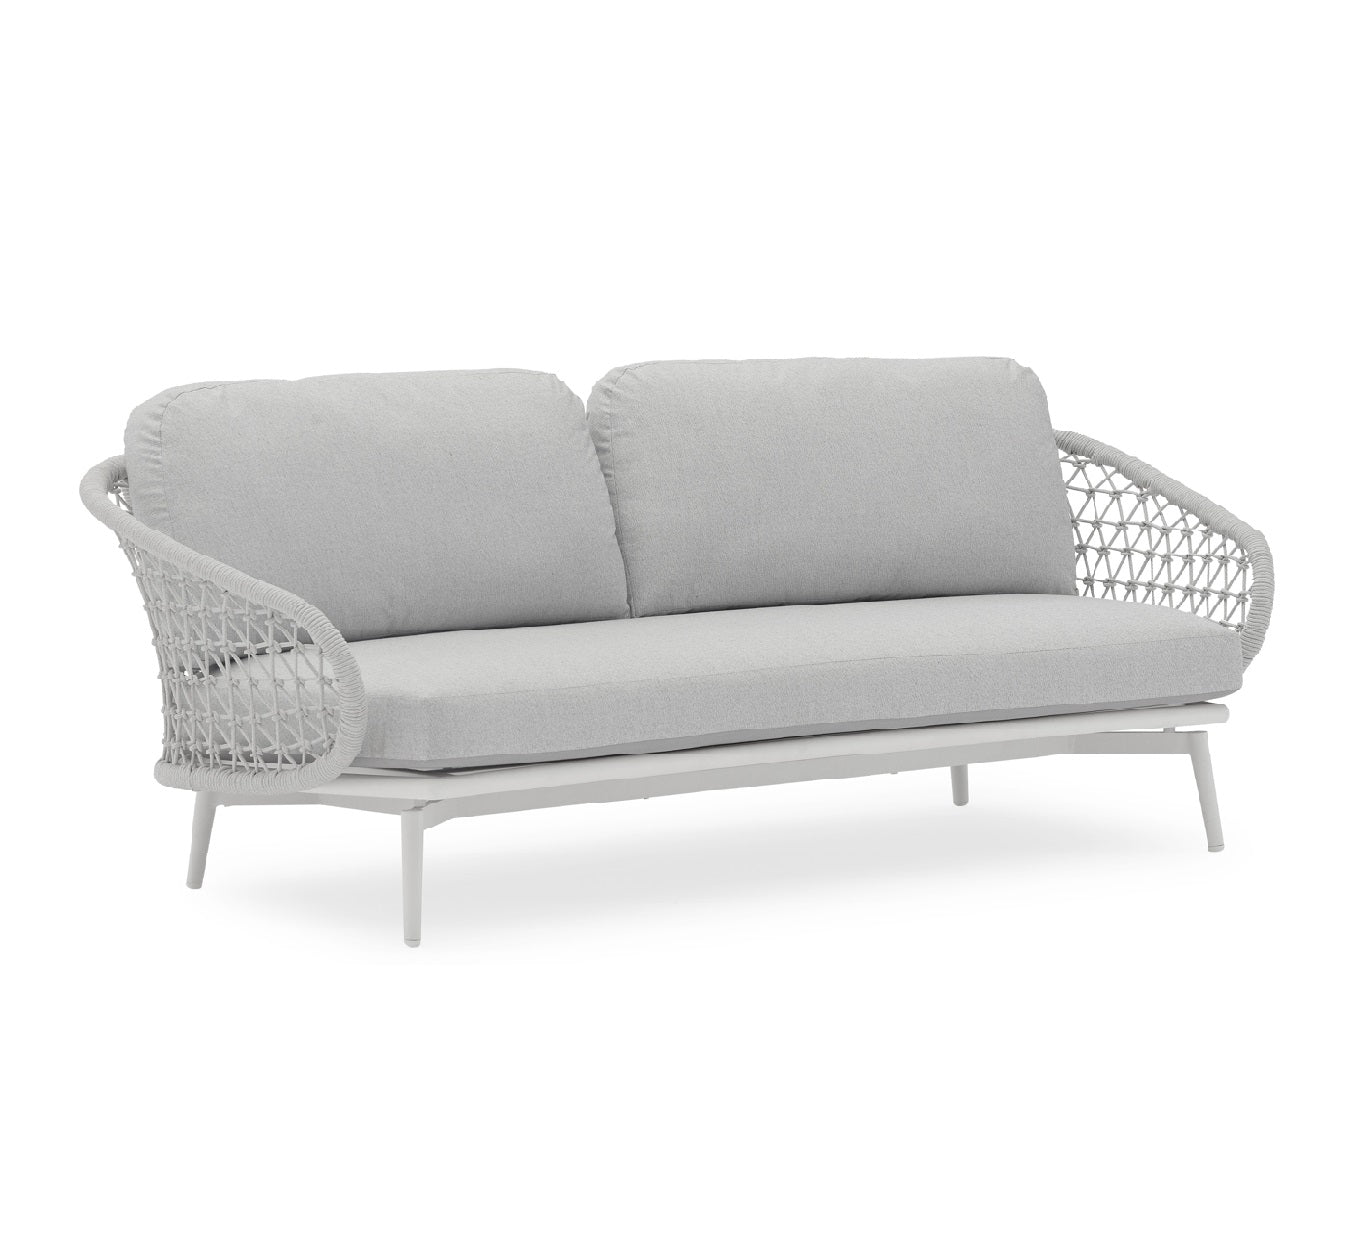 Verona Two Seater Outdoor Lounge - Light Grey